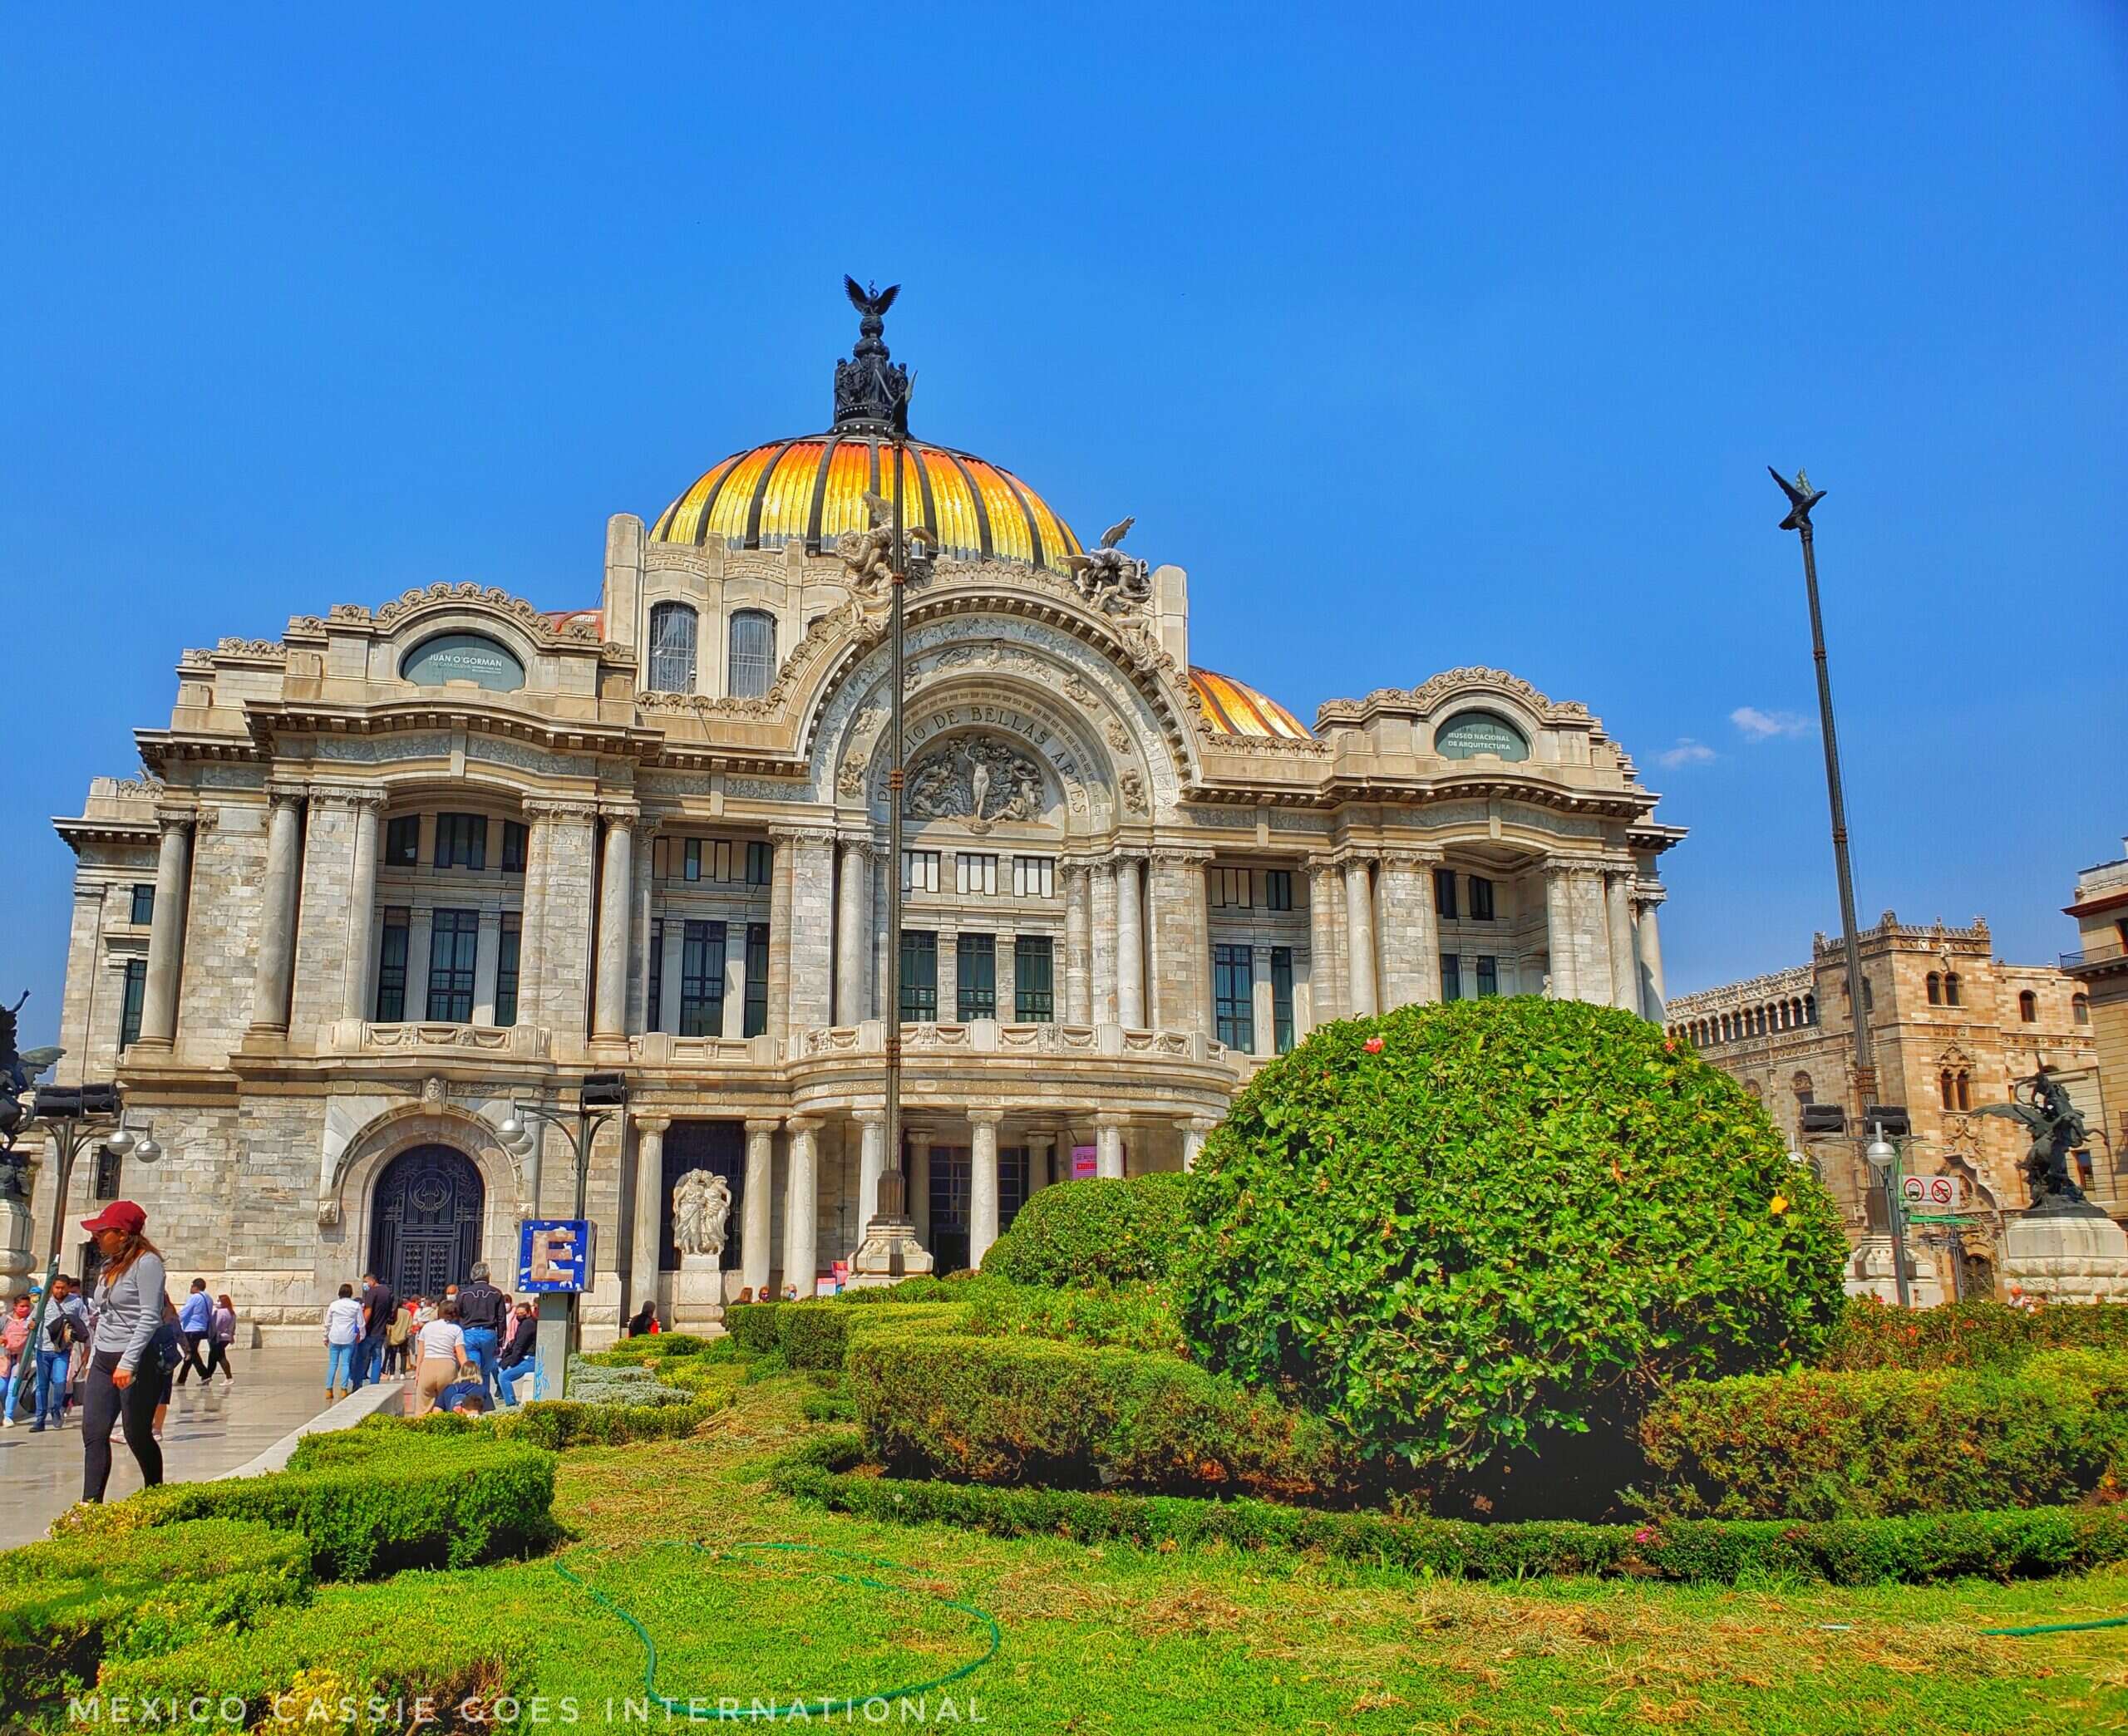 Palacio de Bellas Artes: huge building with yellow and orange domed roof. Grass and bushes in front.